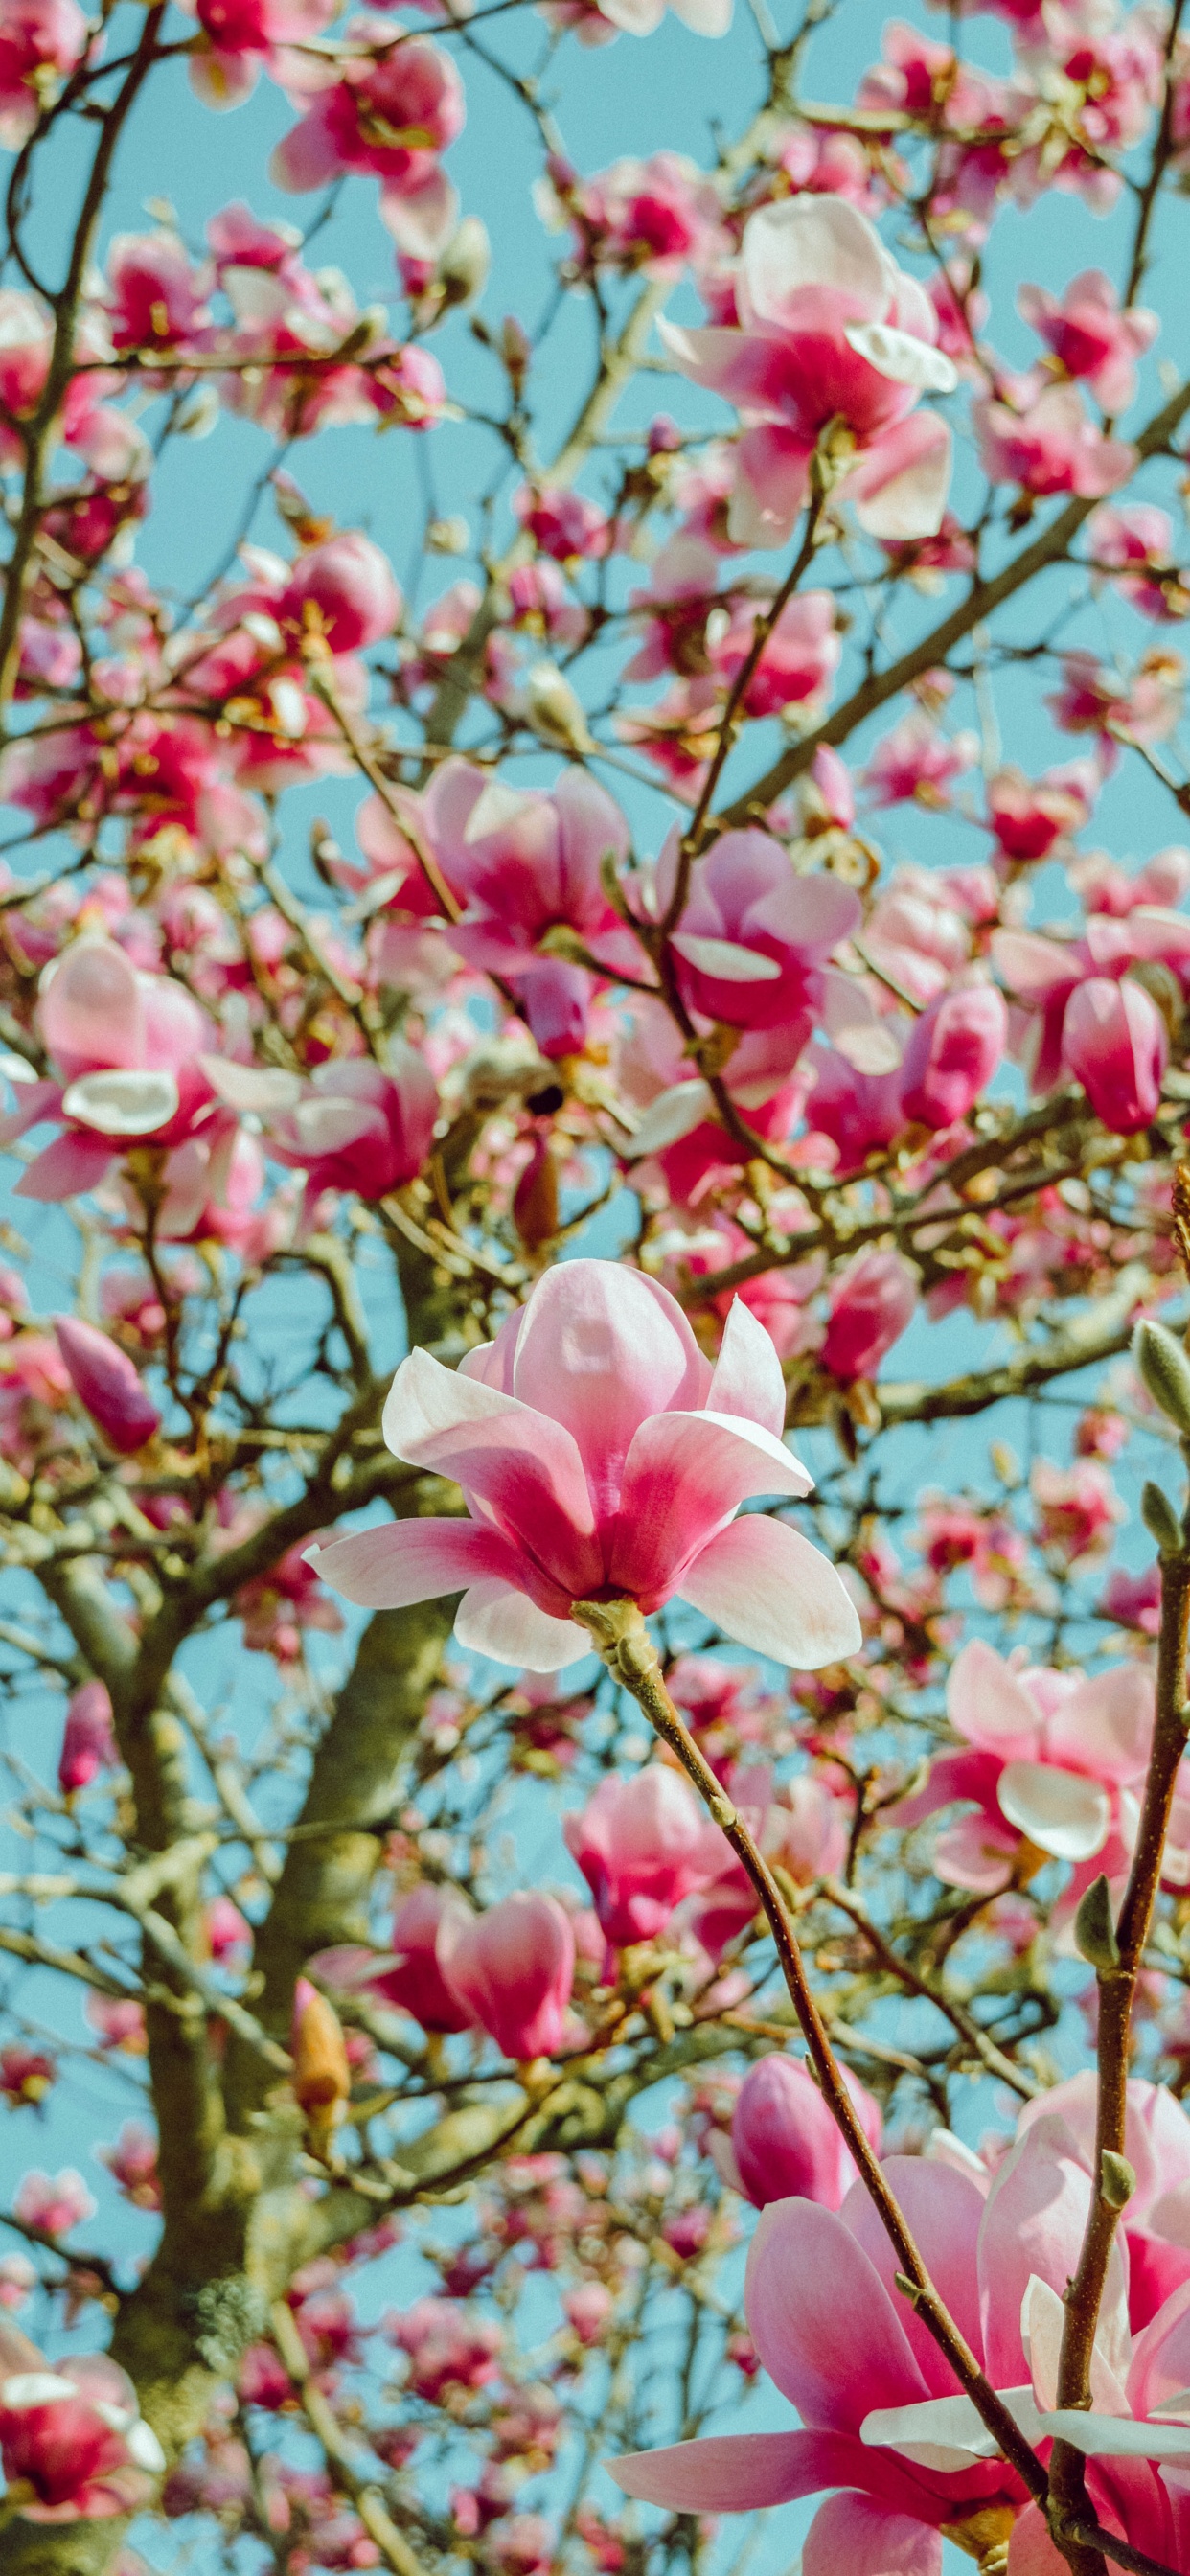 Pink Cherry Blossom in Bloom During Daytime. Wallpaper in 1242x2688 Resolution